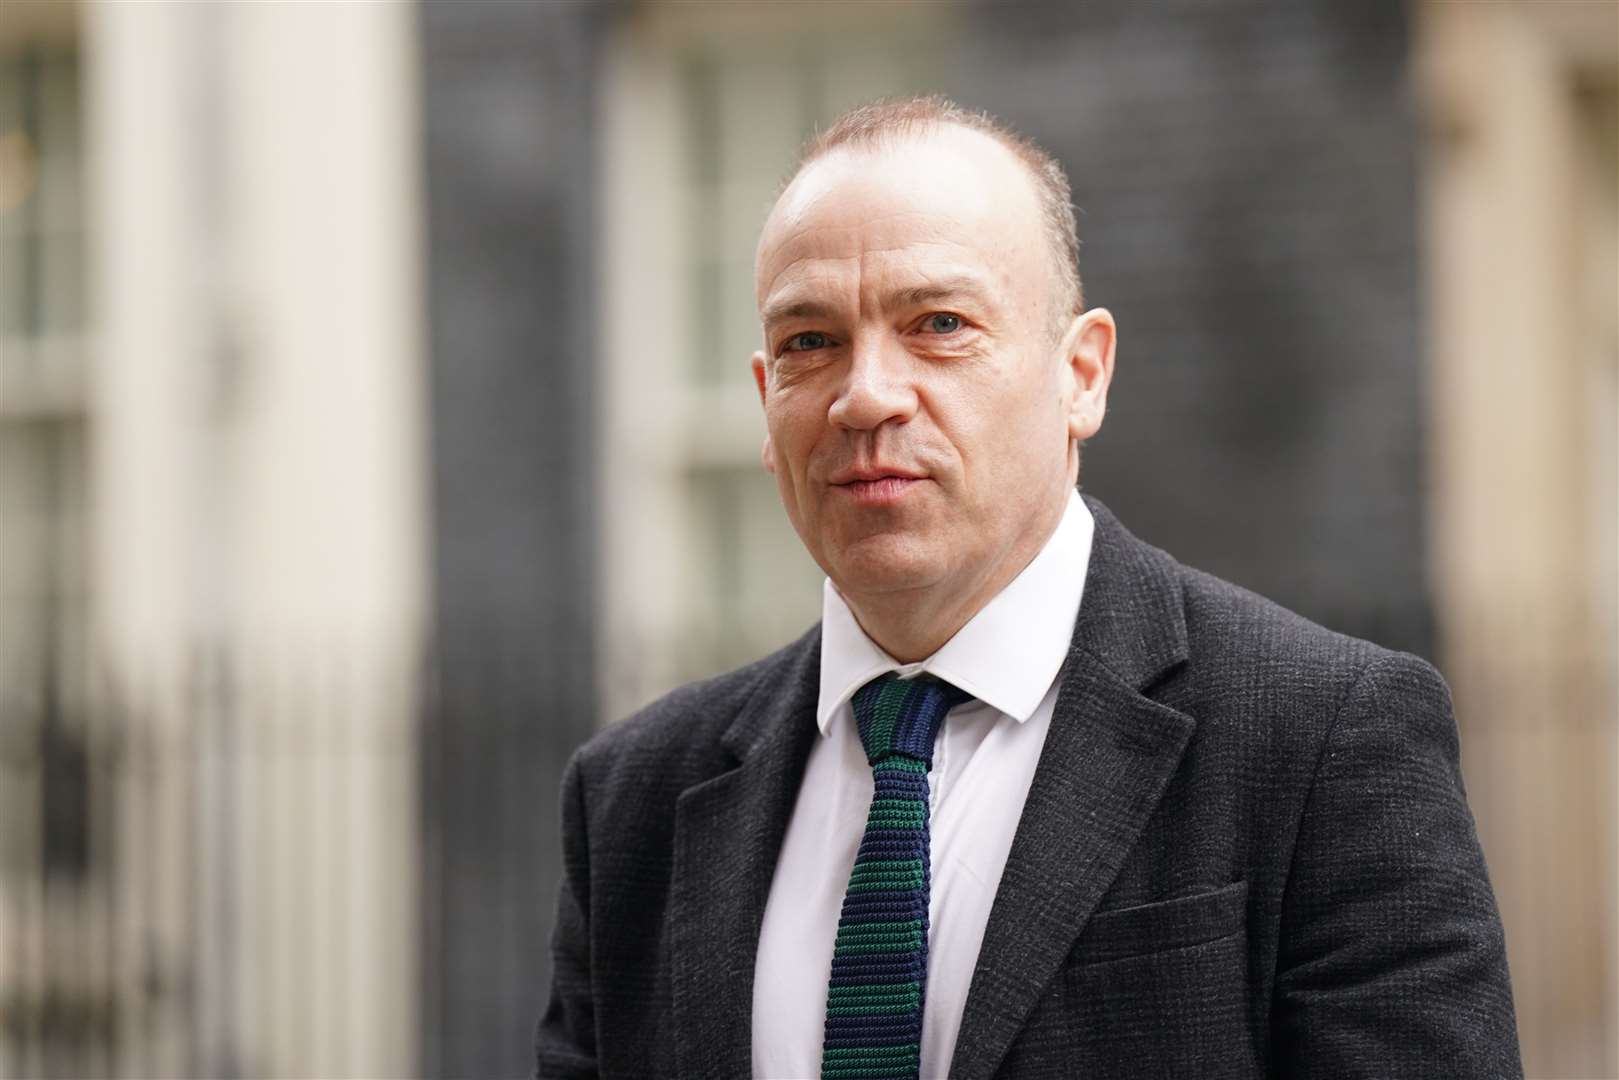 Northern Ireland Secretary Chris Heaton-Harris said the Bill was ‘the best way to deliver justice’ for victims (James Manning/PA)